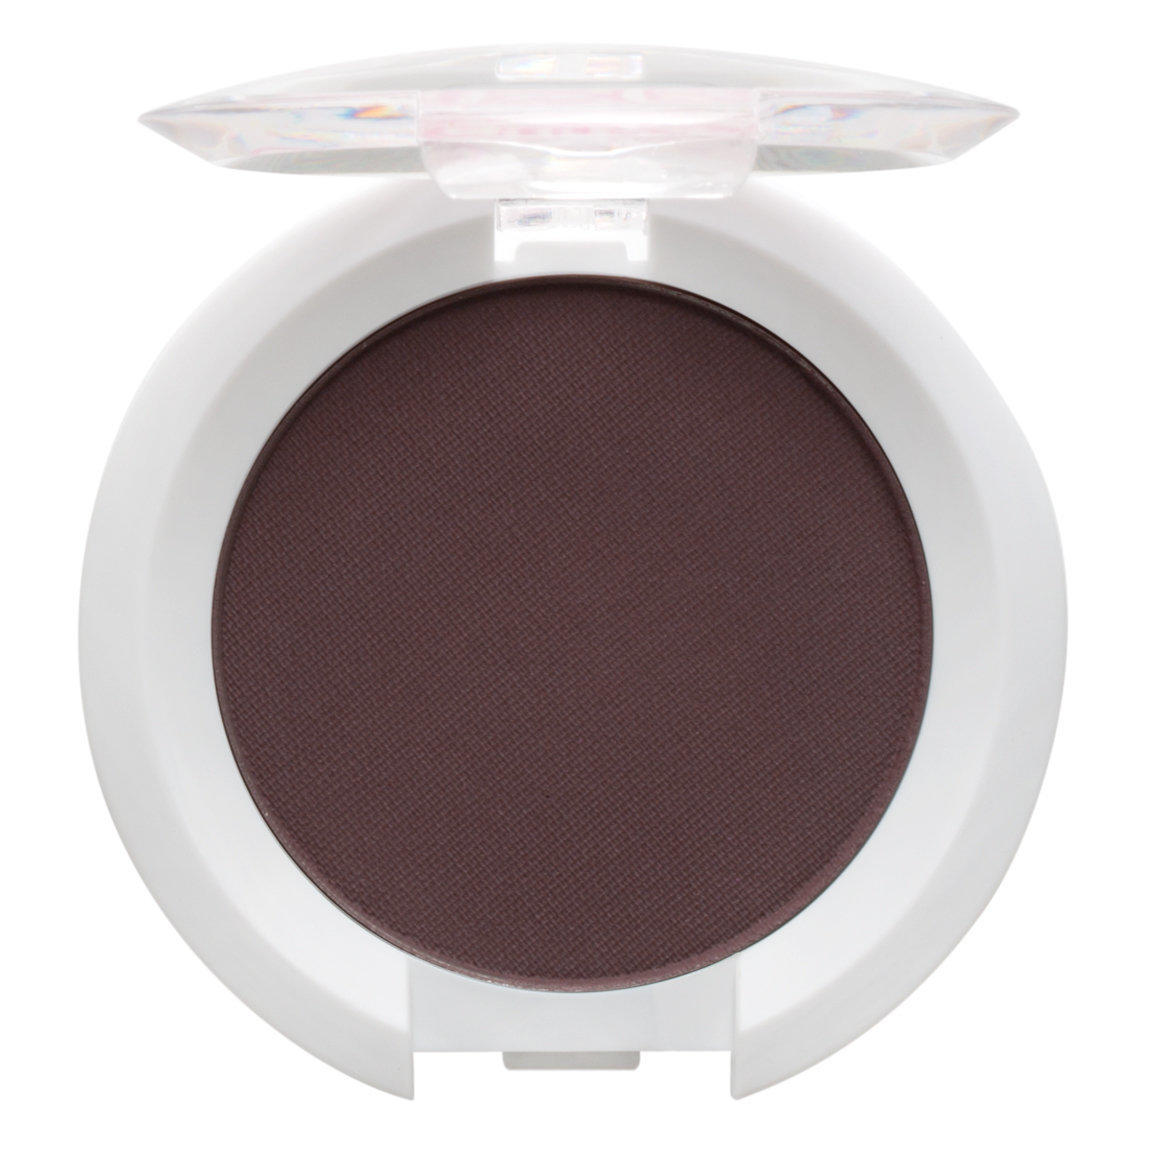 Sugarpill Pressed Eyeshadow Castle On The Hill (brown)